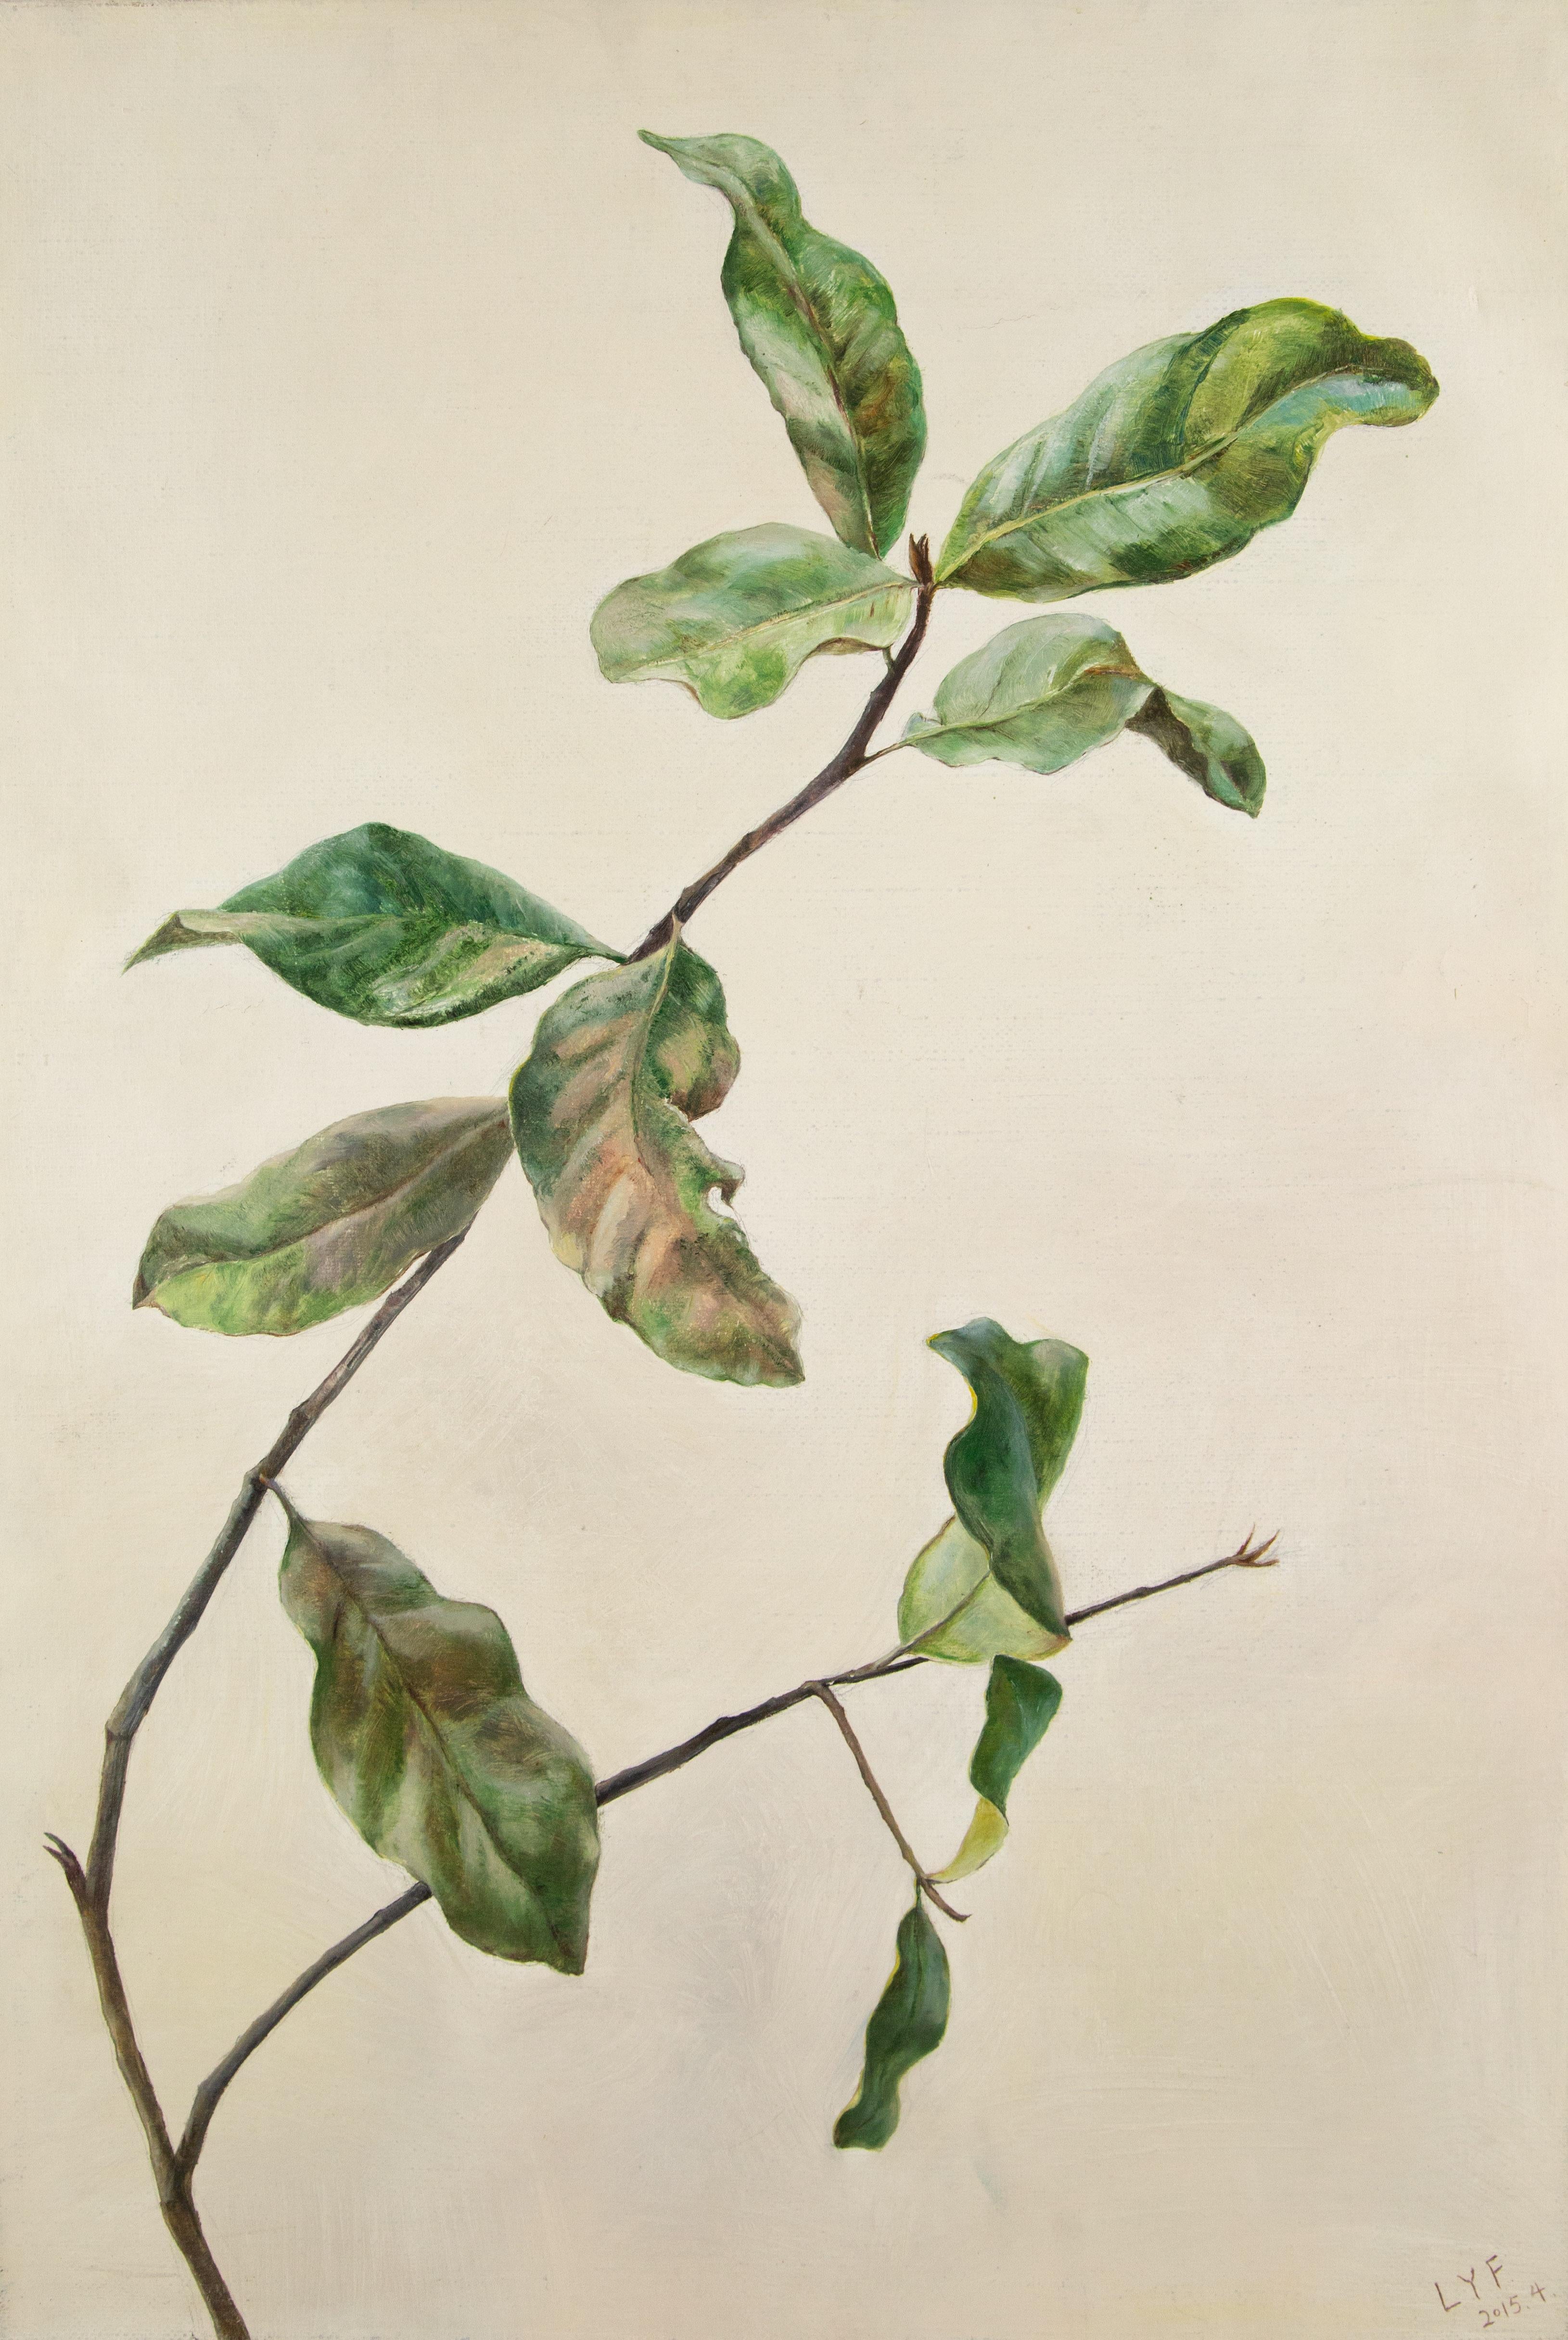  Title: Diverse Elements - Plant
 Medium: Oil on canvas
 Size: 28 x 19 inches
 Frame: Framing options available!
 Condition: The painting appears to be in excellent condition.
 Note: This painting is unstretched
 Year: 2015.4
 Artist: Yifang Liu
